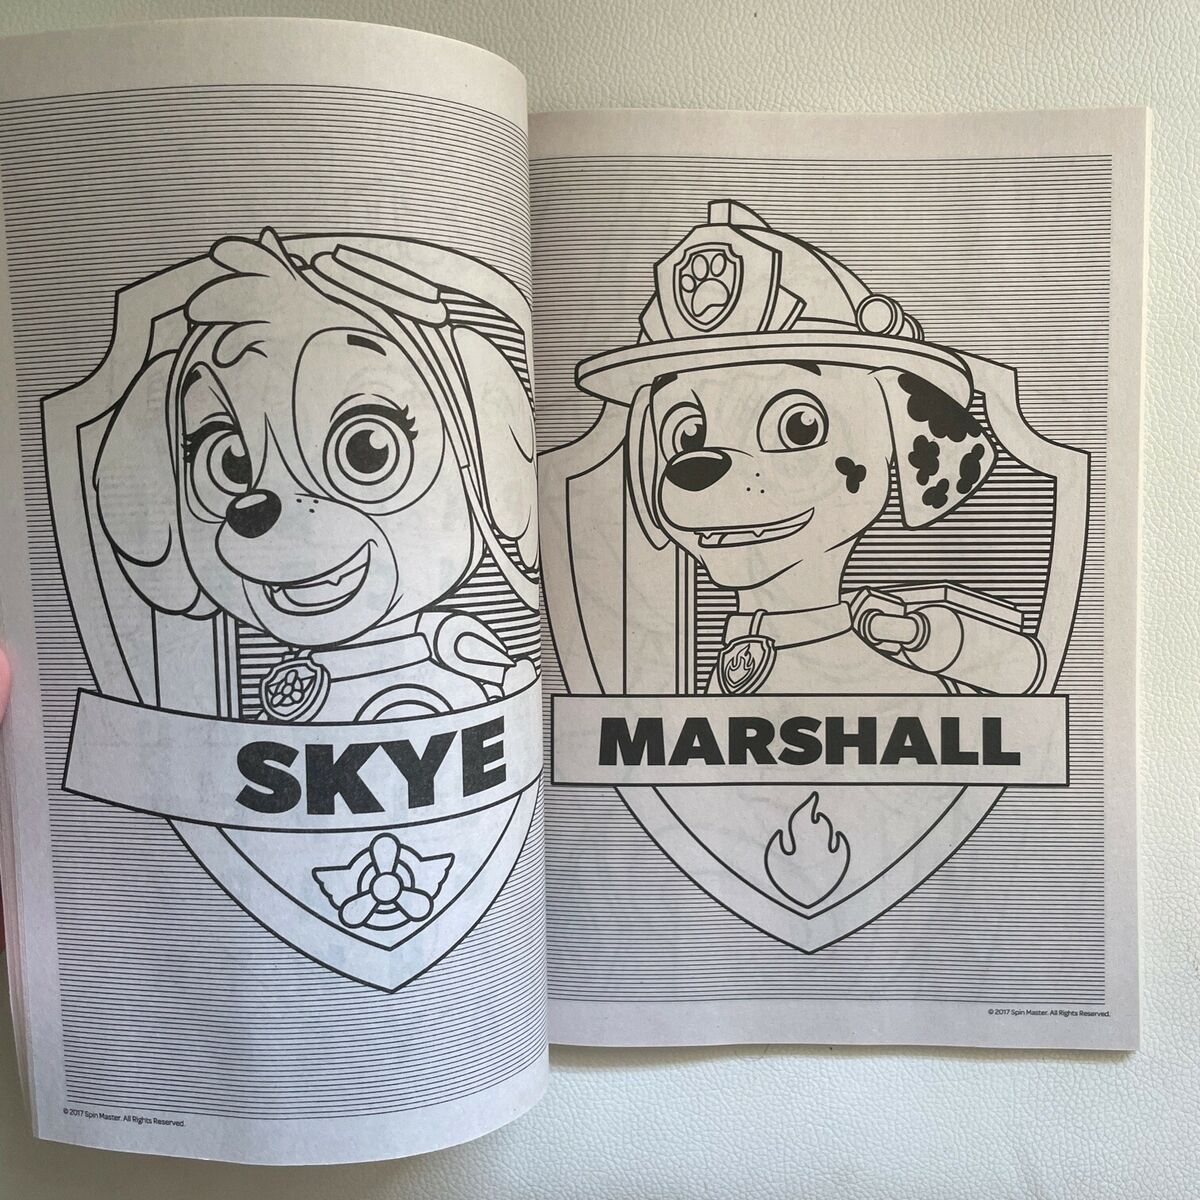 Paw patrol jumbo coloring book new top pups marshall chase rubble licensed kids